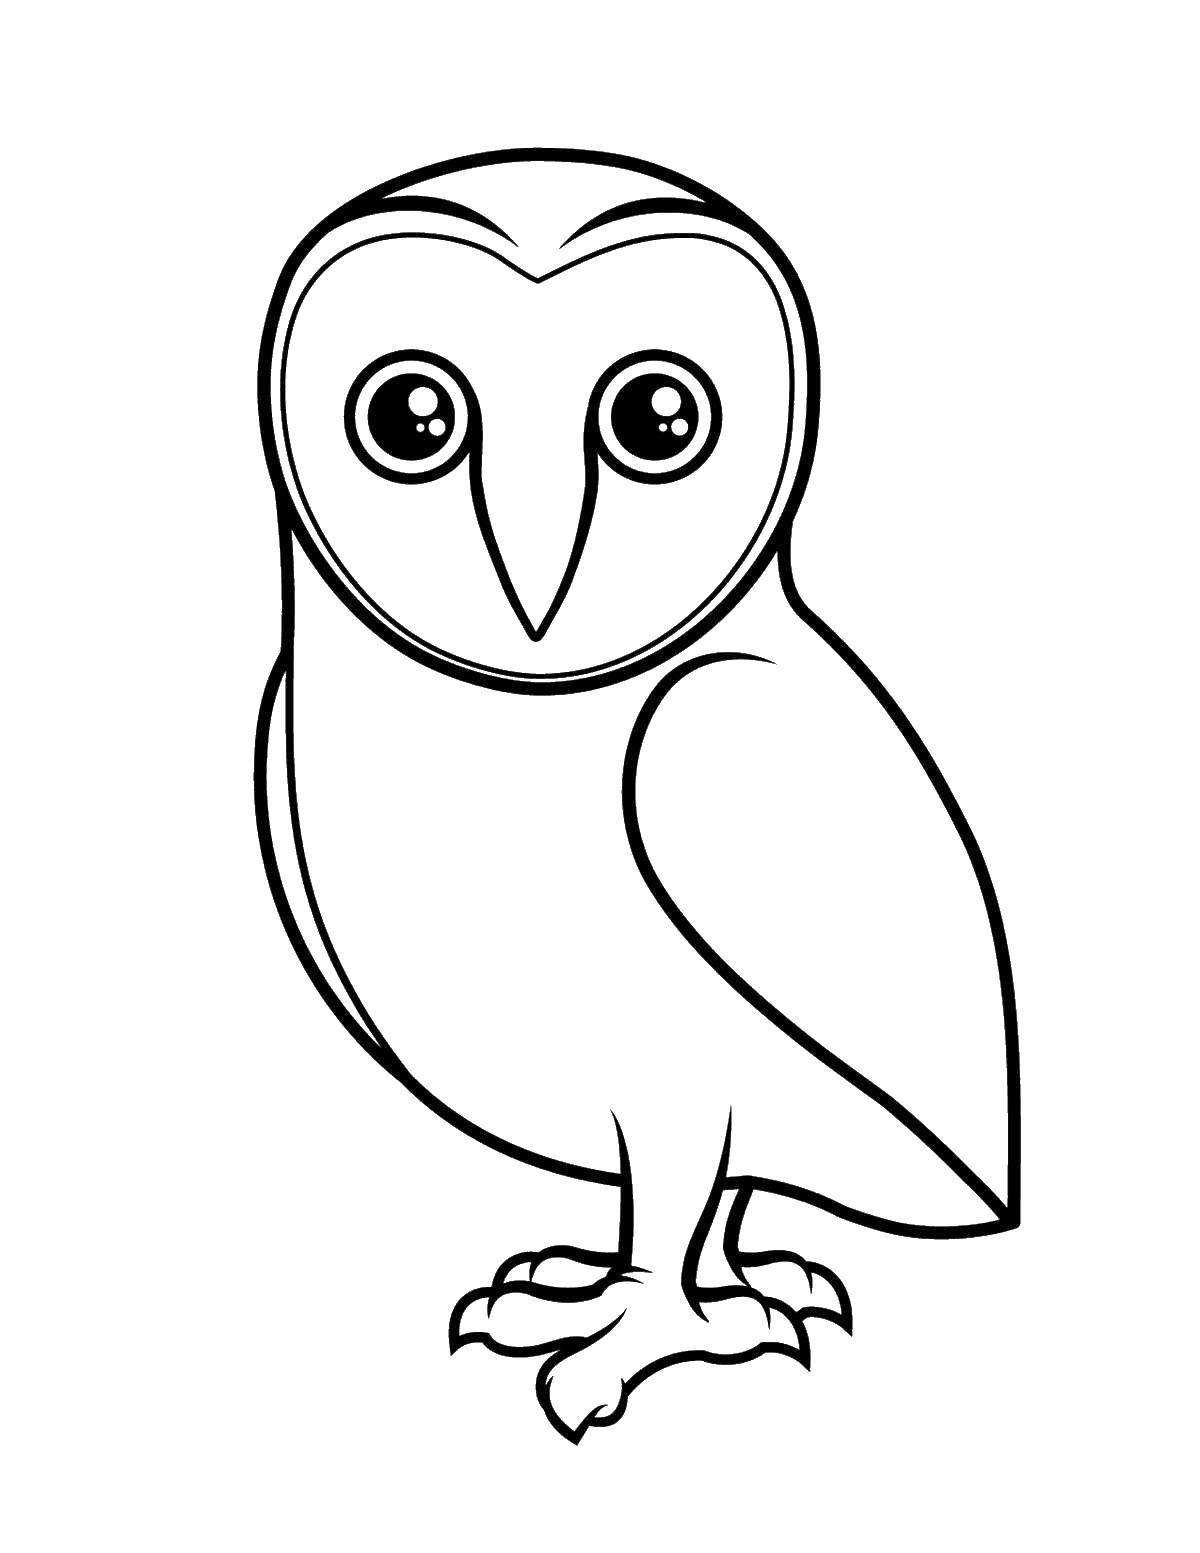 Coloring White owl. Category birds. Tags:  birds, owls.